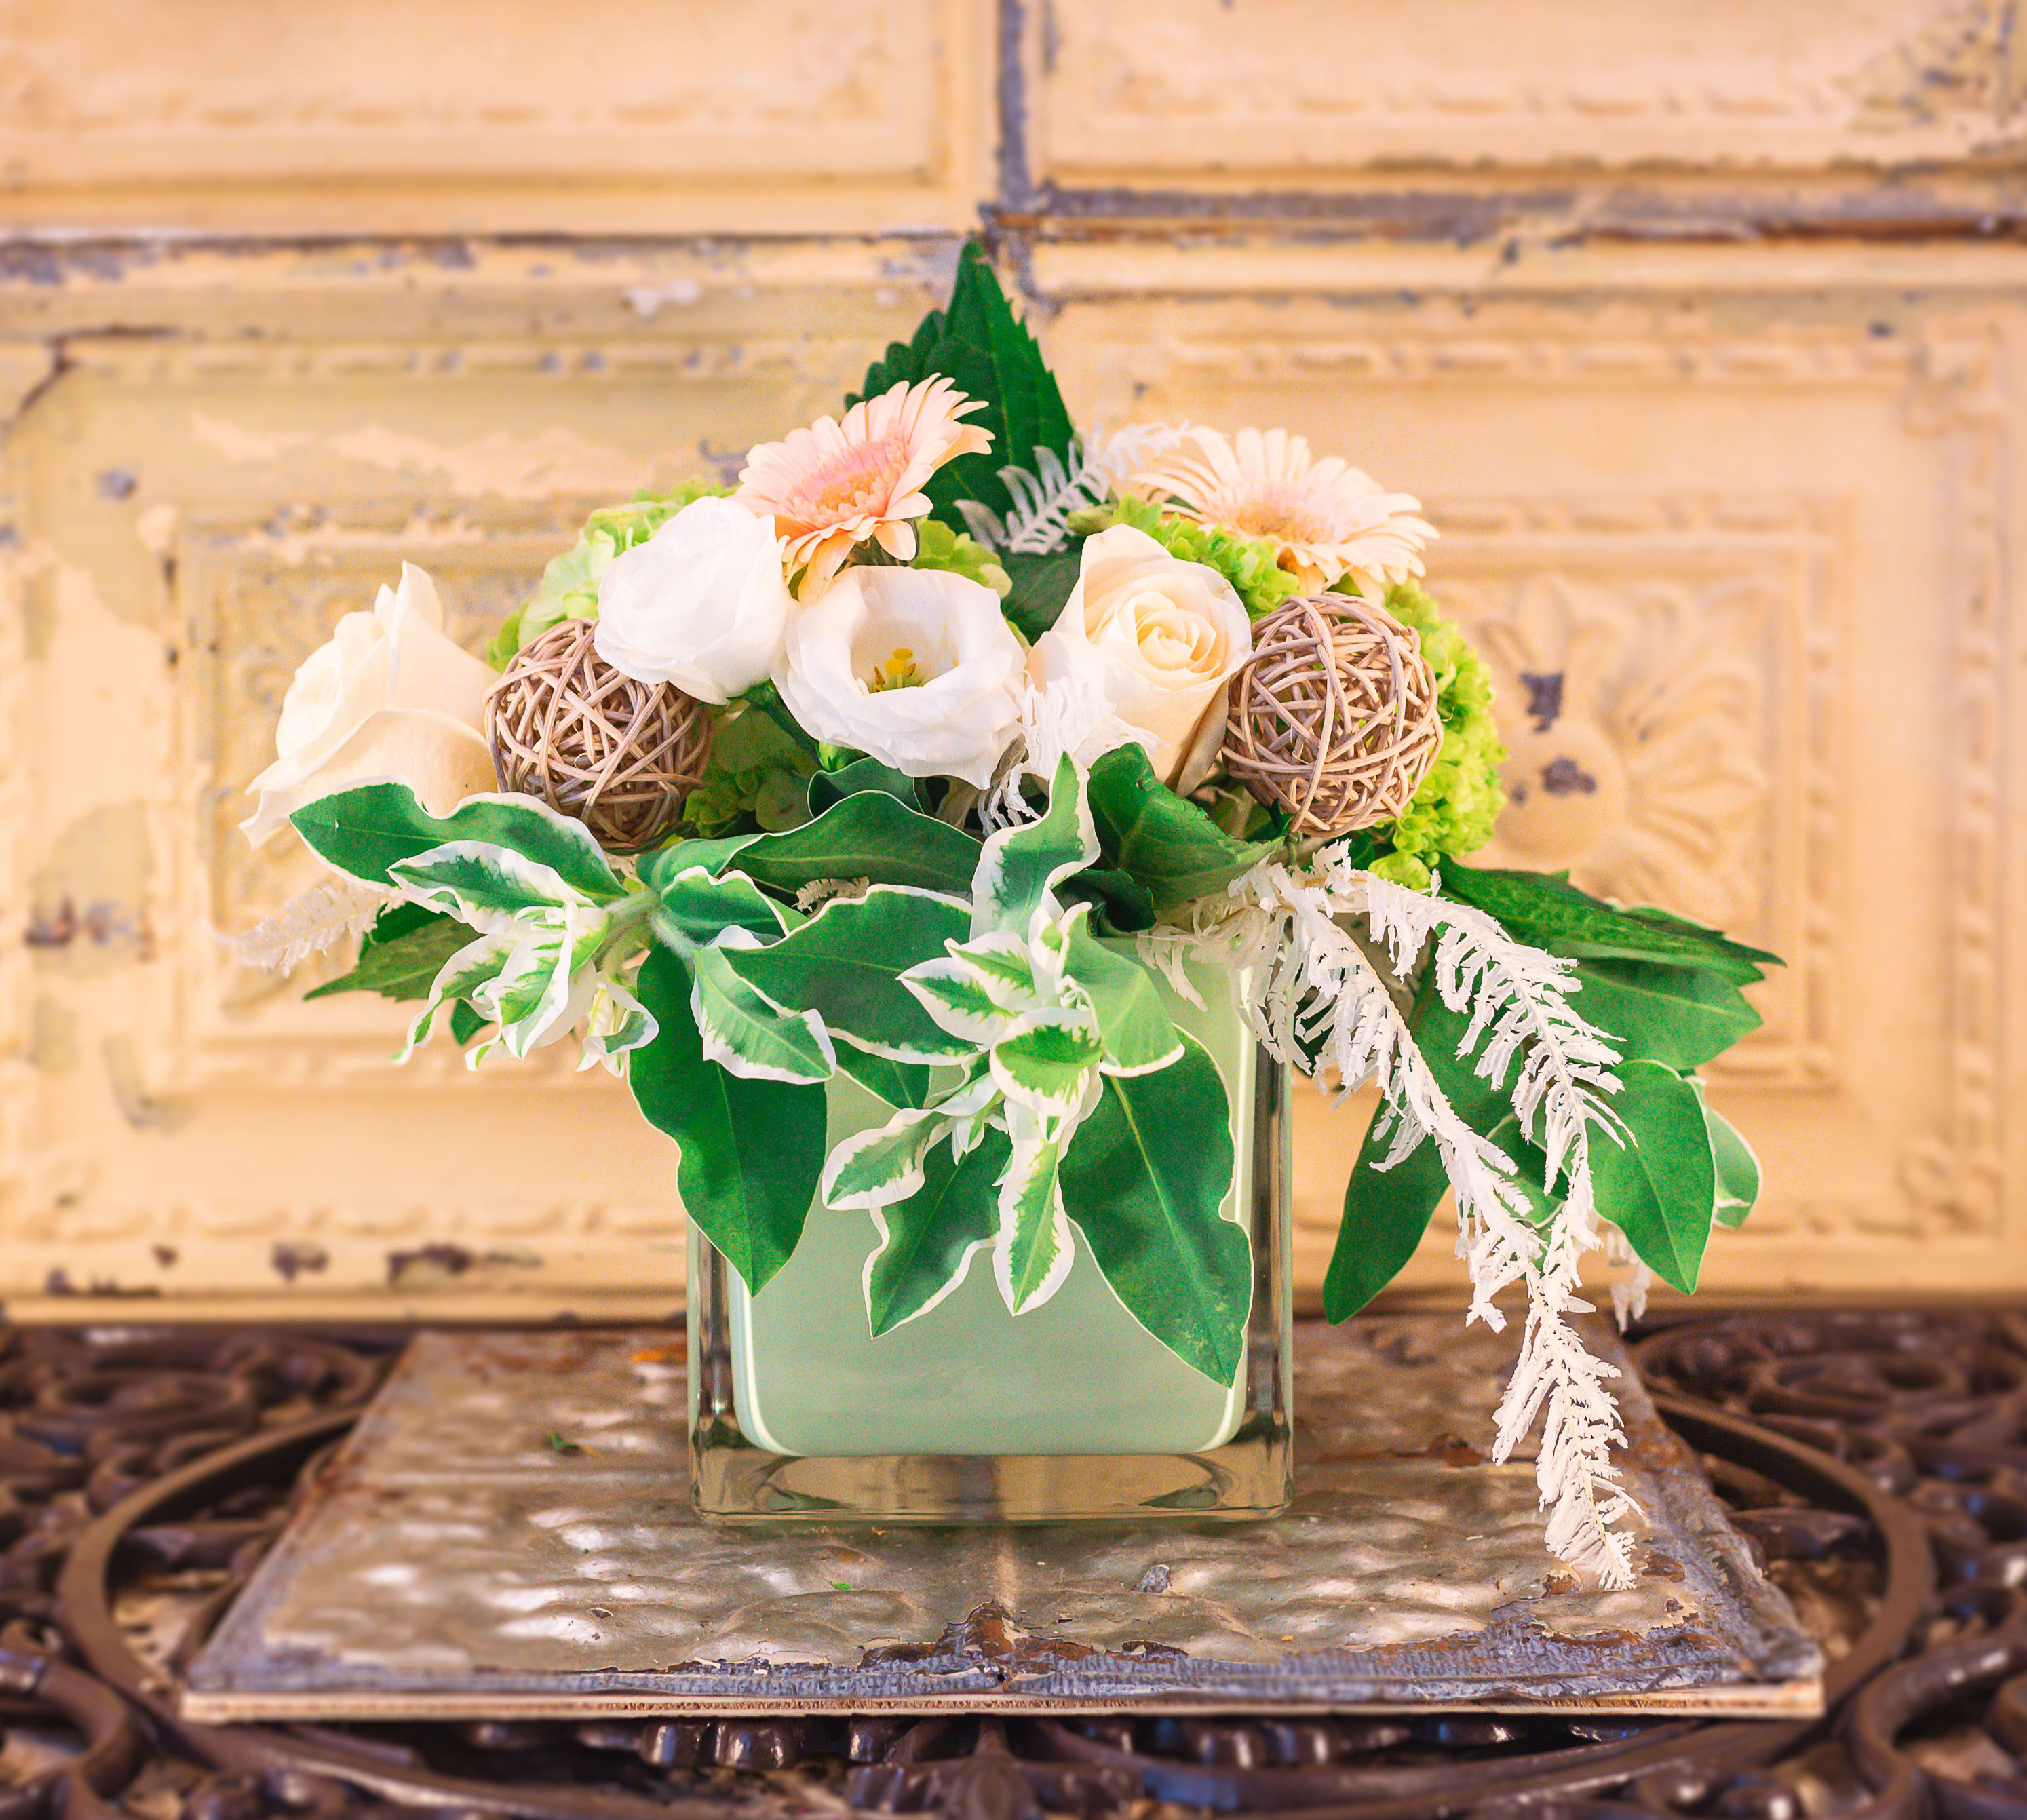 James Taylor - A green and white arrangement of lisianthus, roses, gerbera daisies, and assorted greens.